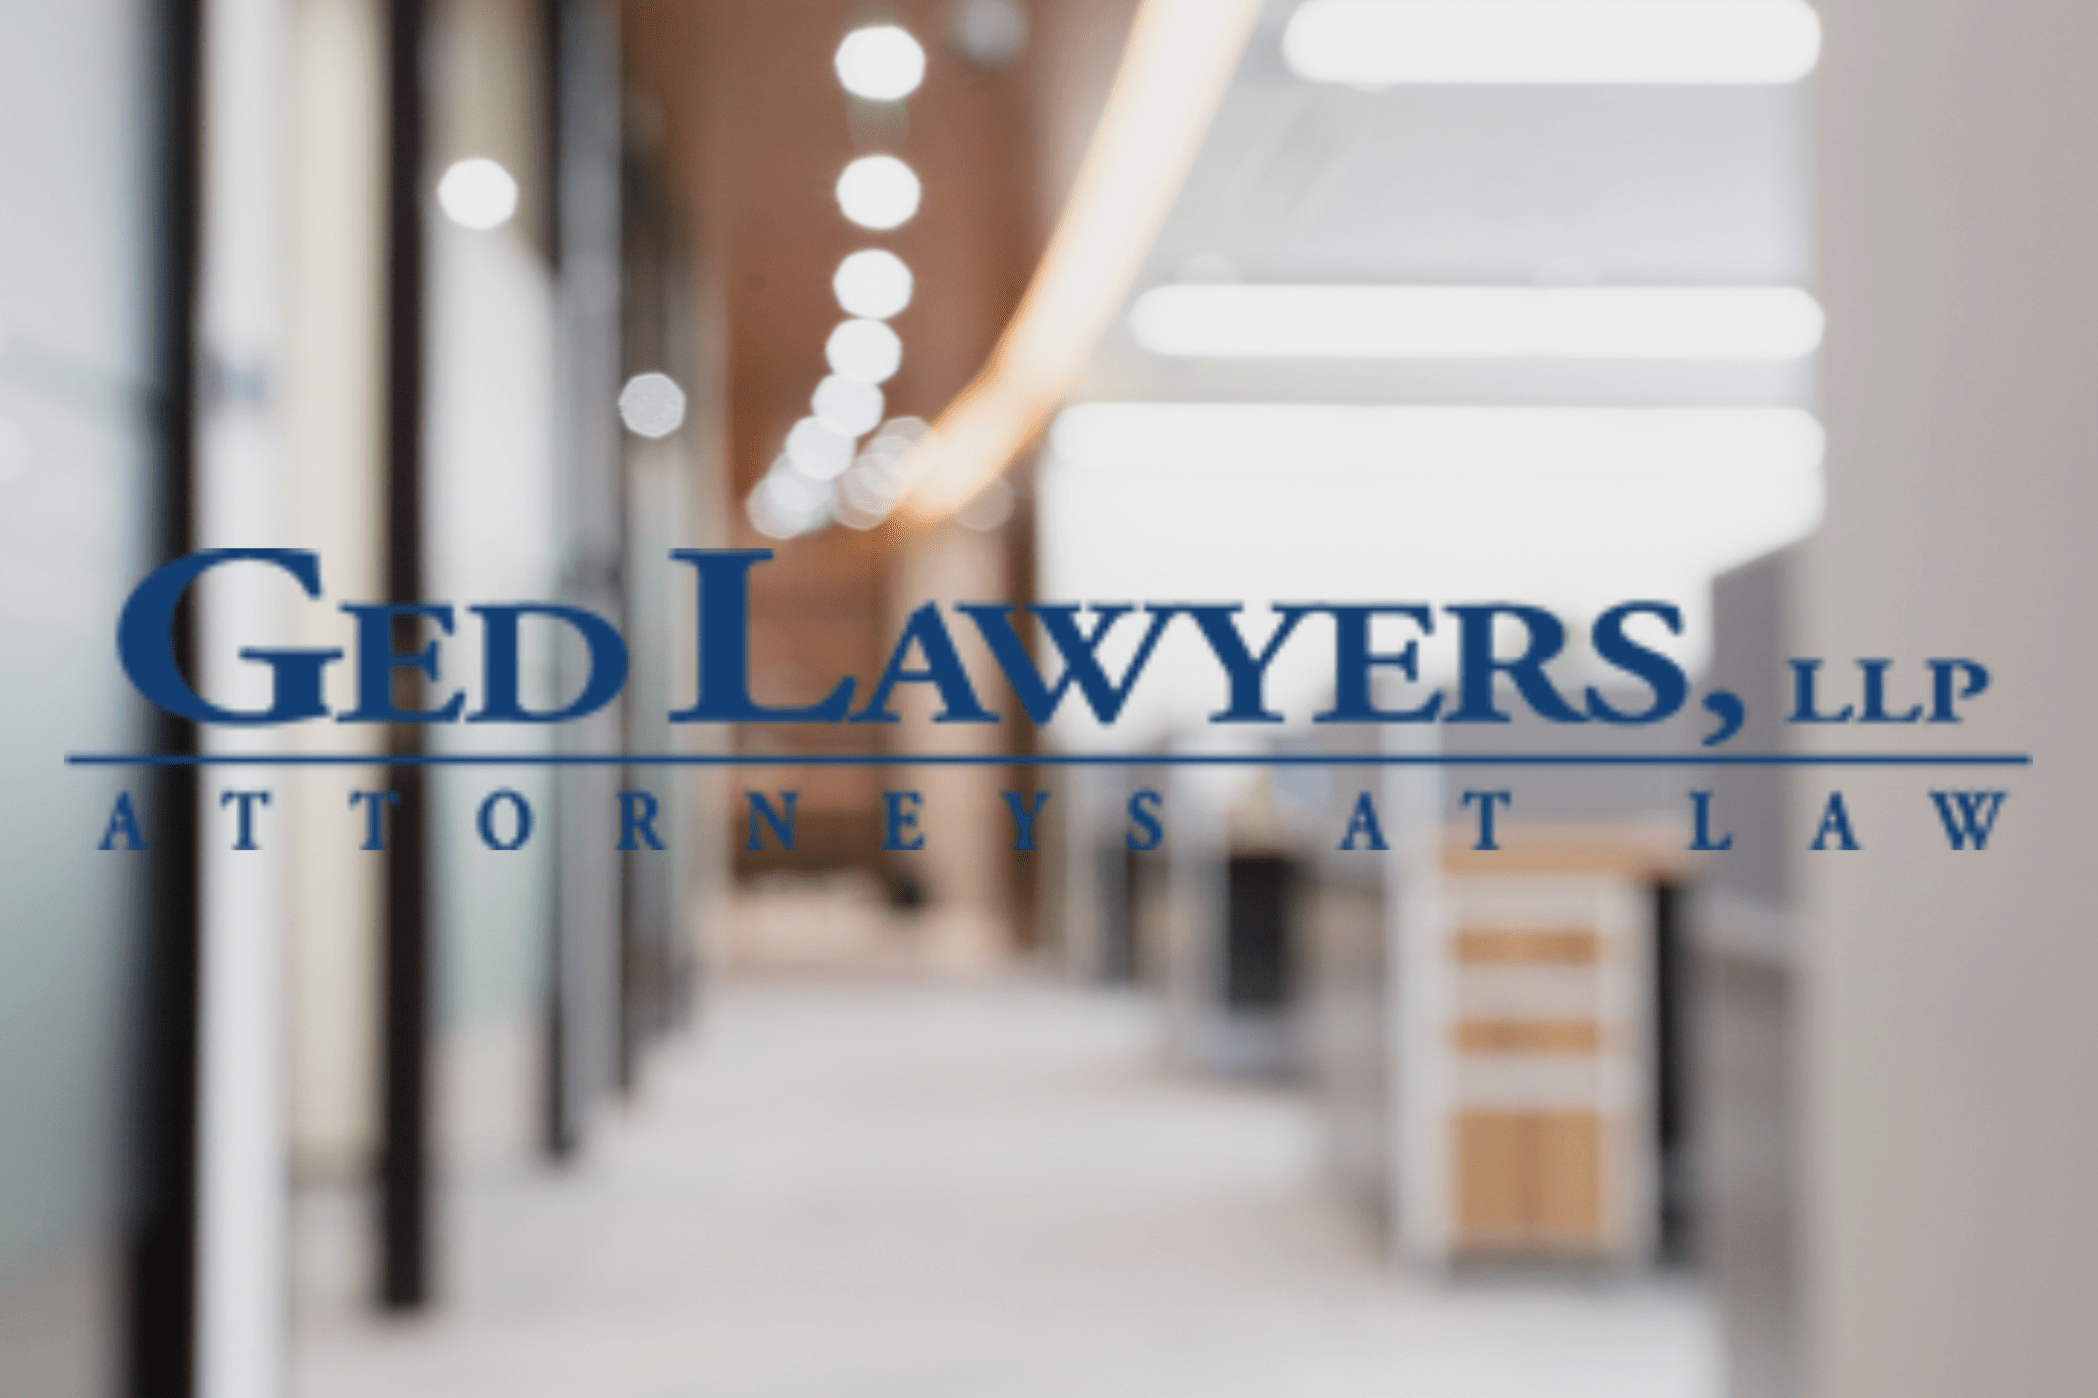 Discovering The Path to Exponential Law Firm Growth: Ged Lawyers